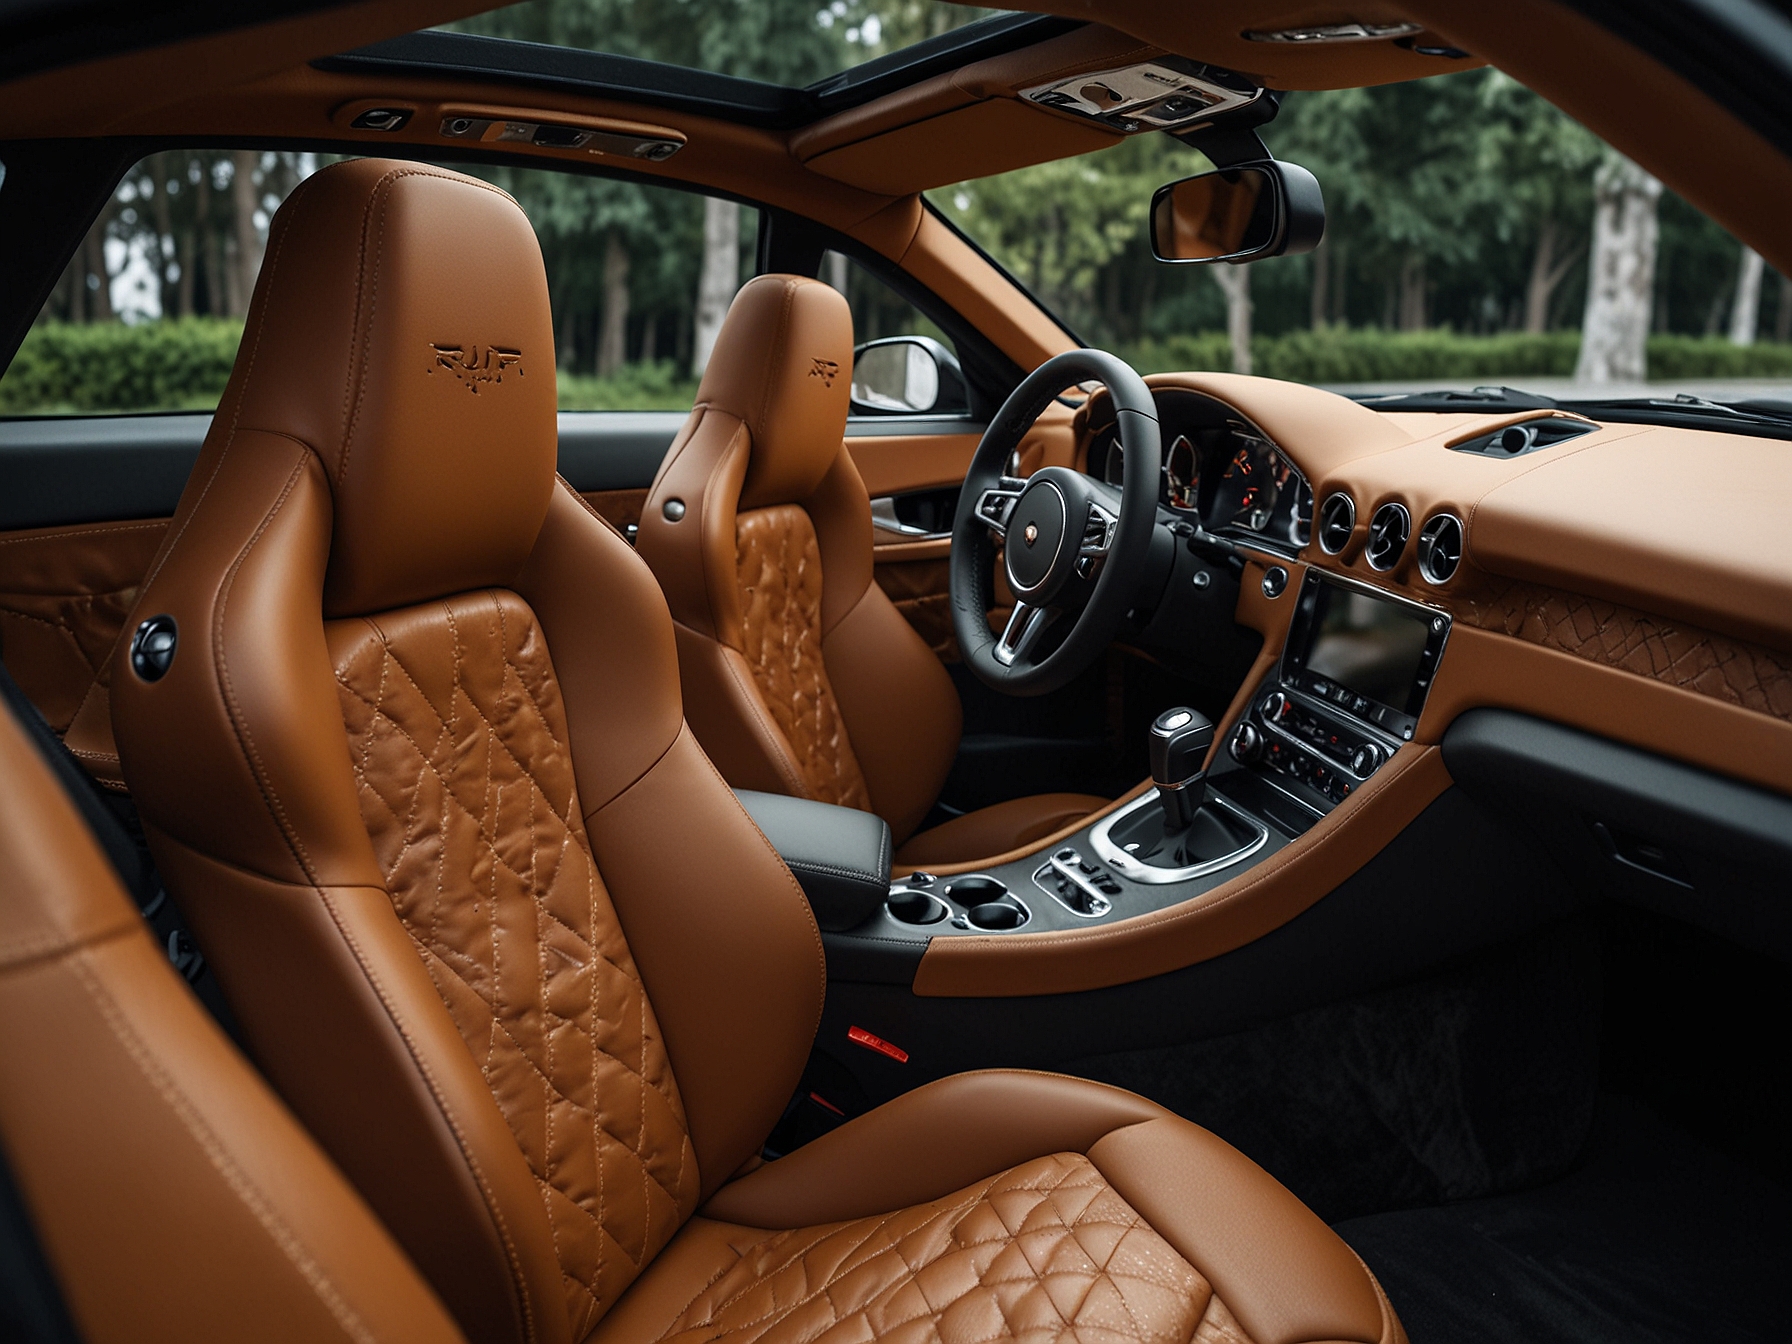 Interior view of the 2022 RUF SCR, highlighting the luxurious brown deerskin seats with intricate embroidery, replacing bespoke craftsmanship and a focus on driving excellence.